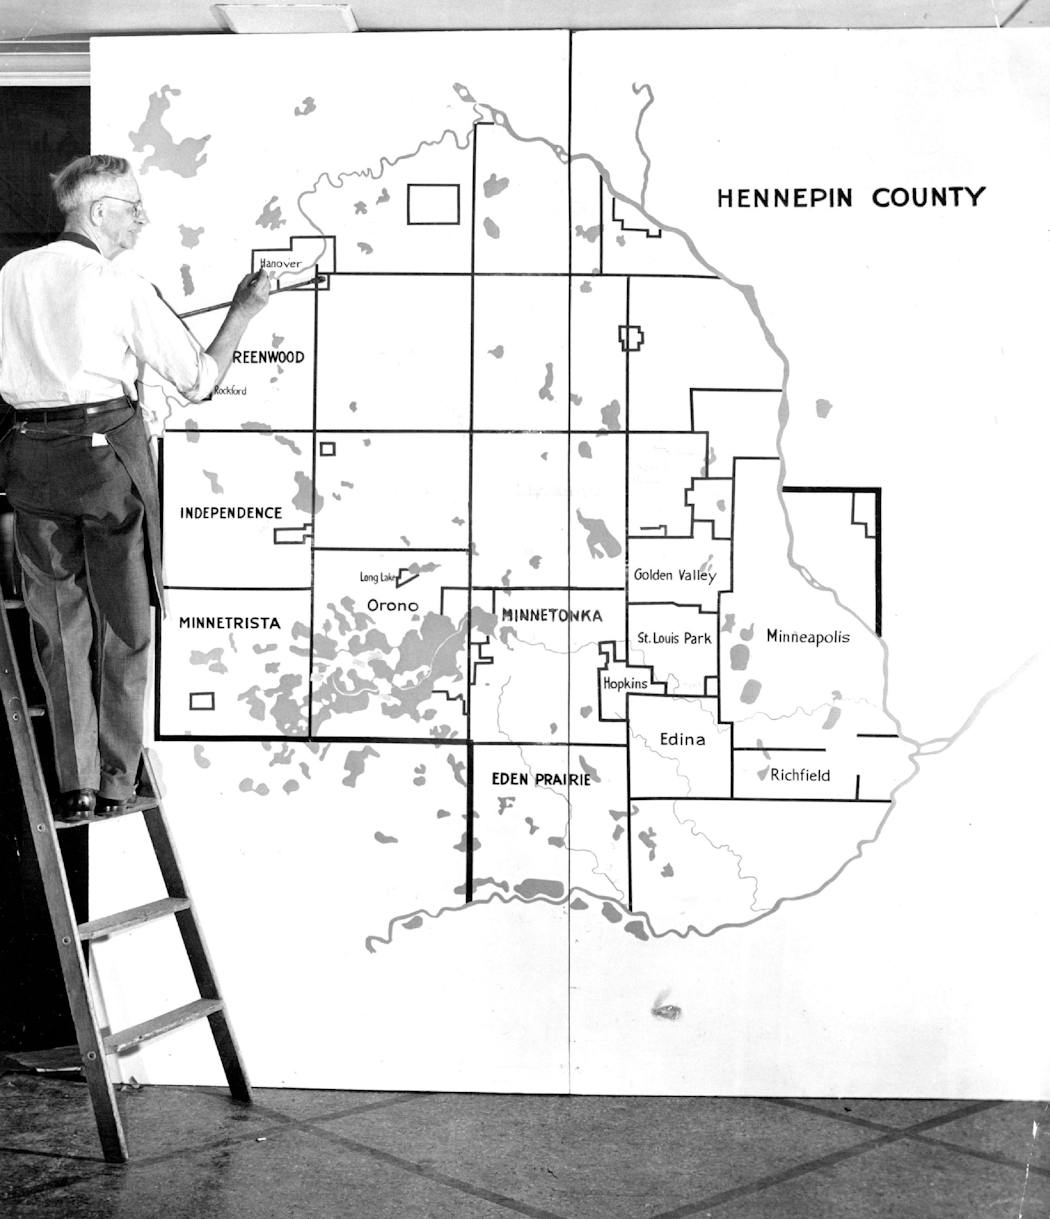 Artist O.E. Johnson painted a map of Hennepin County's political subdivisions in 1956. The map was intended to be displayed at a picnic featuring local government officials.